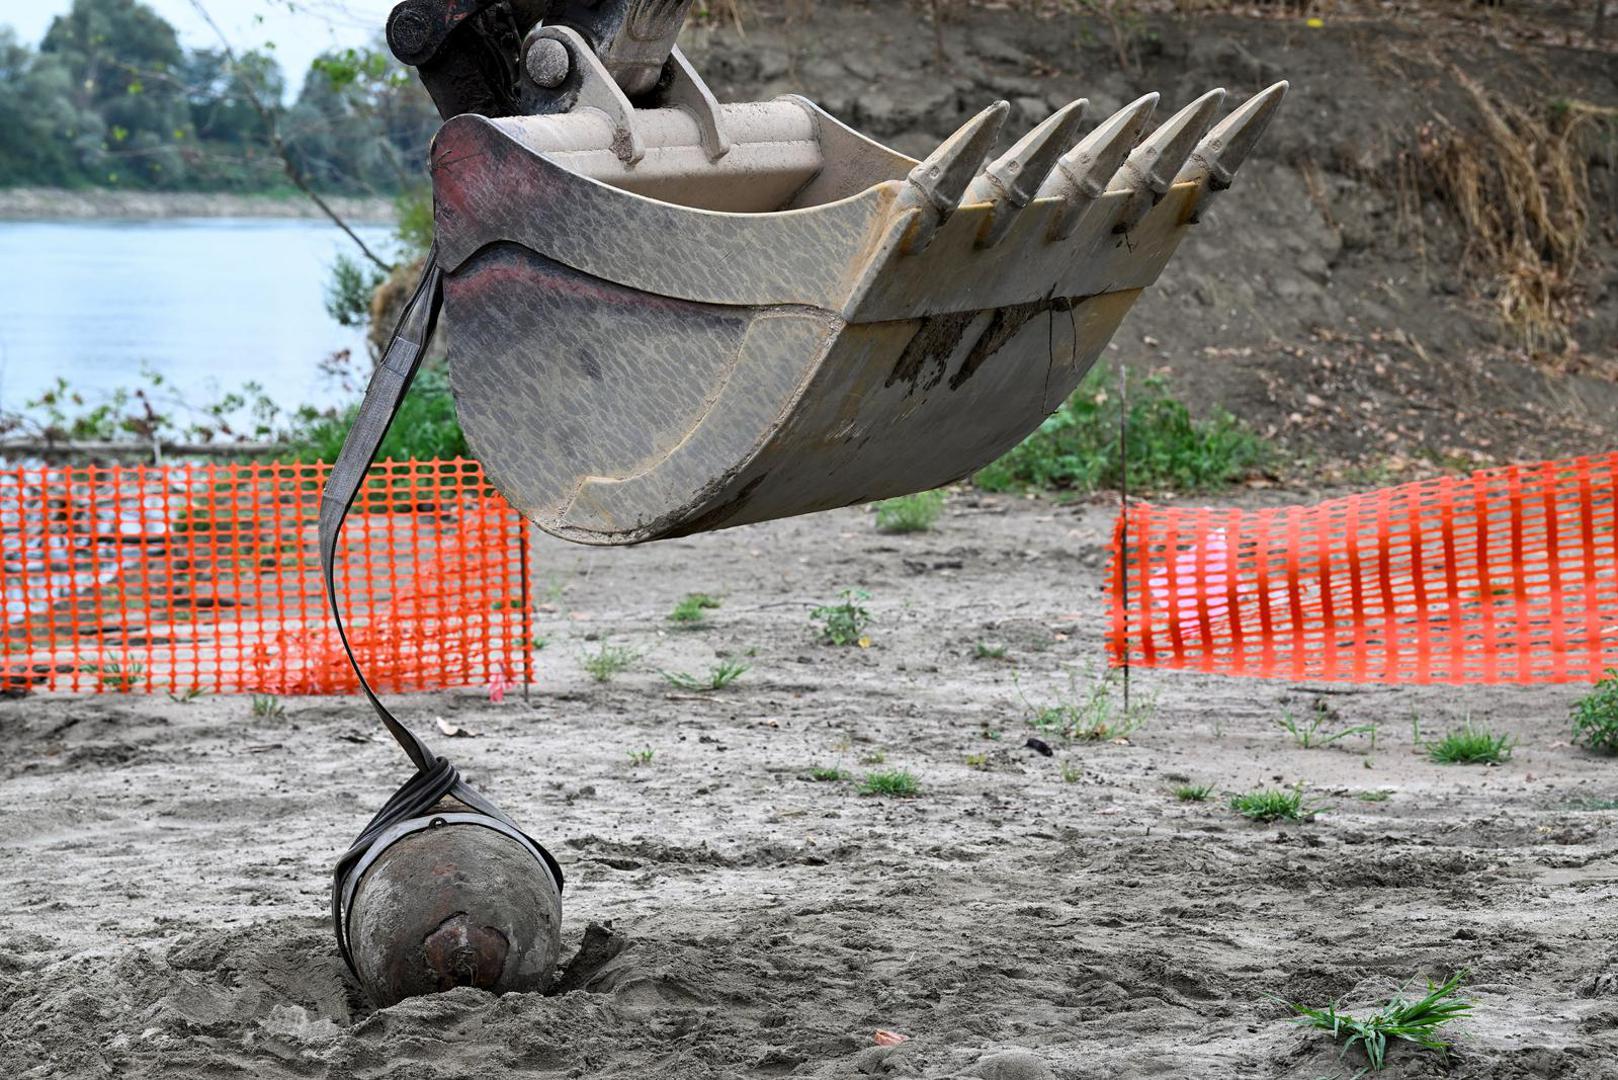 A World War Two bomb is seen being removed a few days after being discovered in the dried-up river Po which suffered from the worst drought in 70 years, in Borgo Virgilio, Italy on August 7, 2022. REUTERS / Flavio lo Scalzo Photo: FLAVIO LO SCALZO/REUTERS